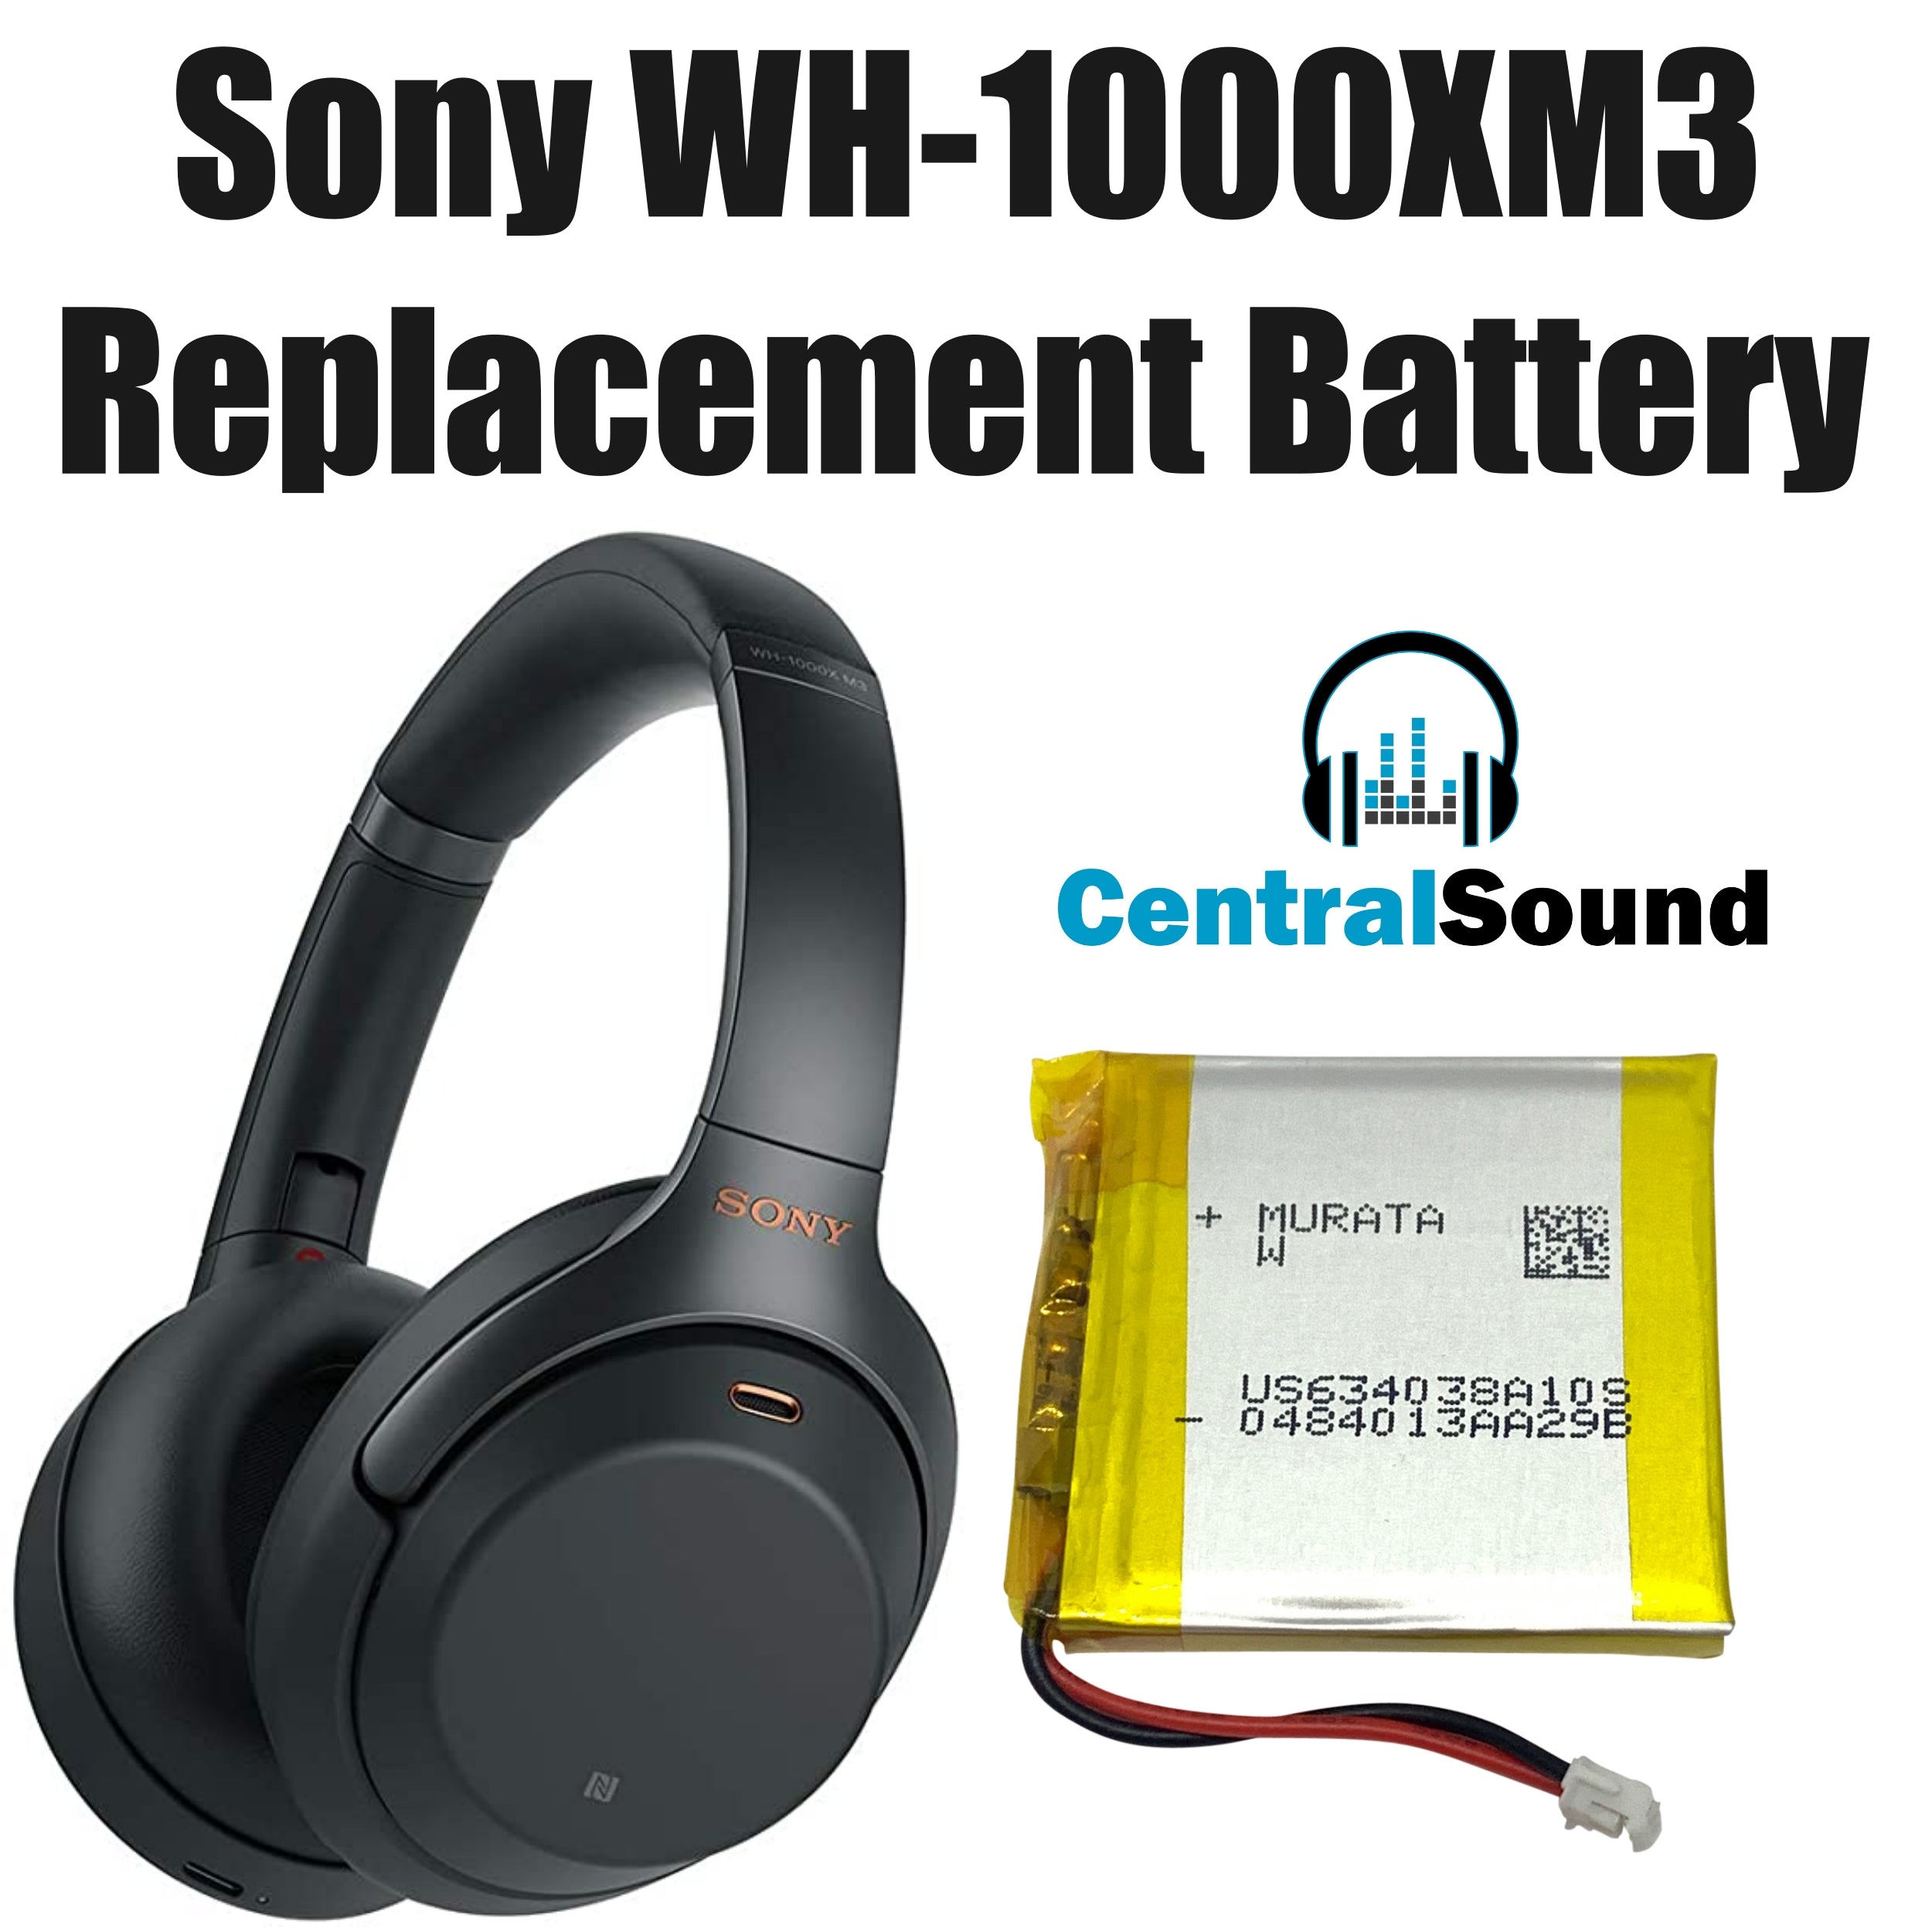 Sony WH-1000XM3 Wireless Headphones Replacement Li-Ion Battery Part 3.7V 1000mAh - CentralSound